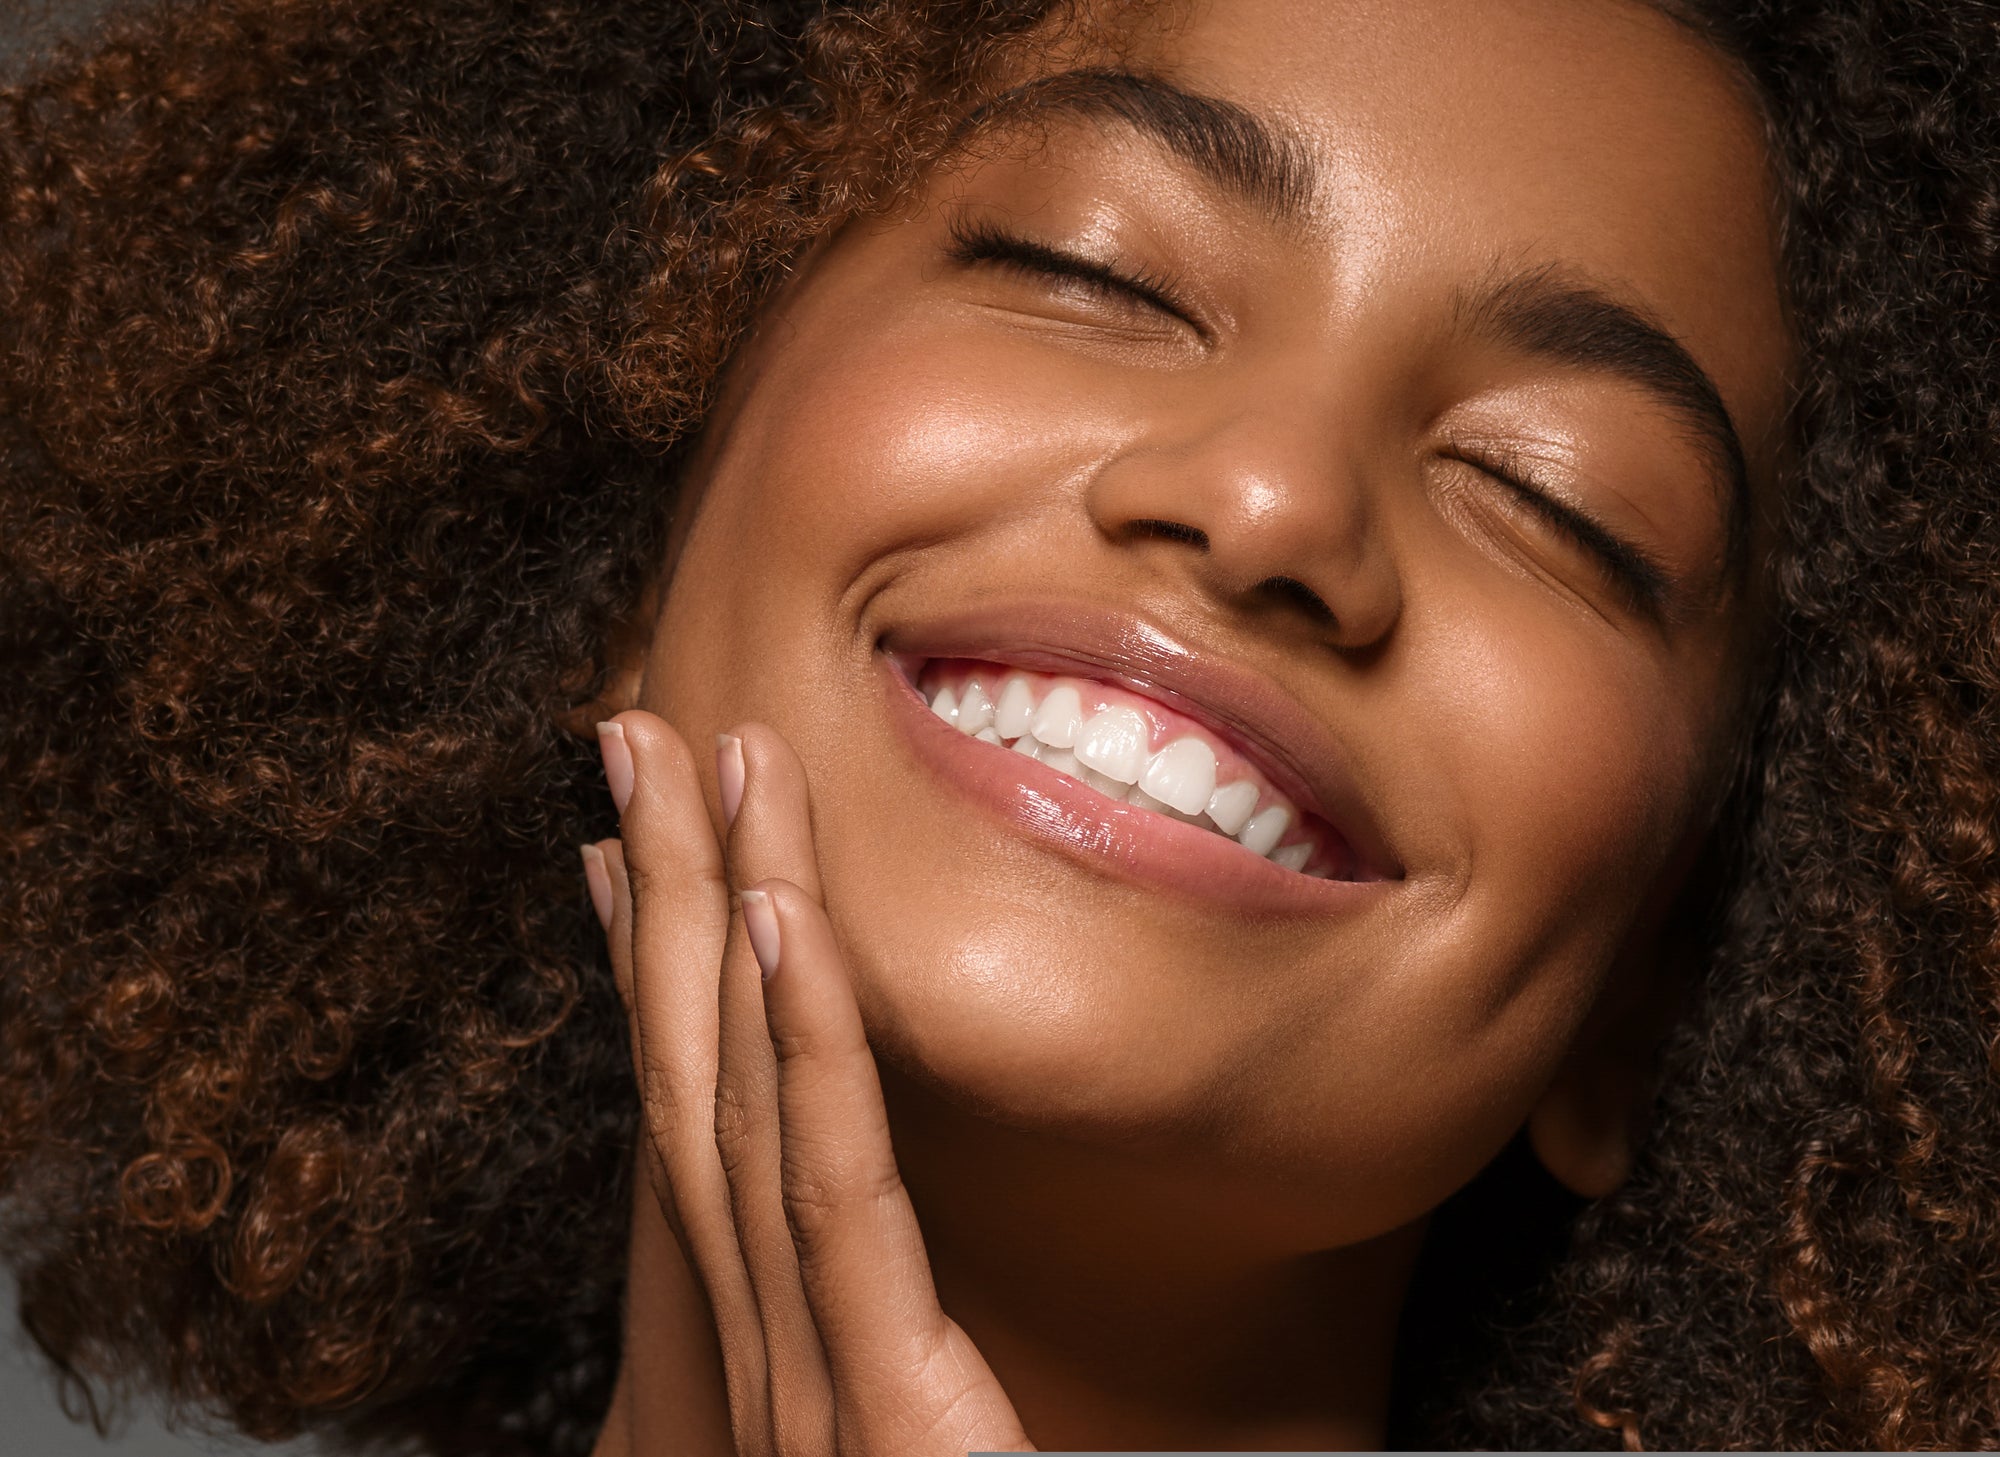 5 Simple Tips to Keep Skin Clean, Soft, and Healthy